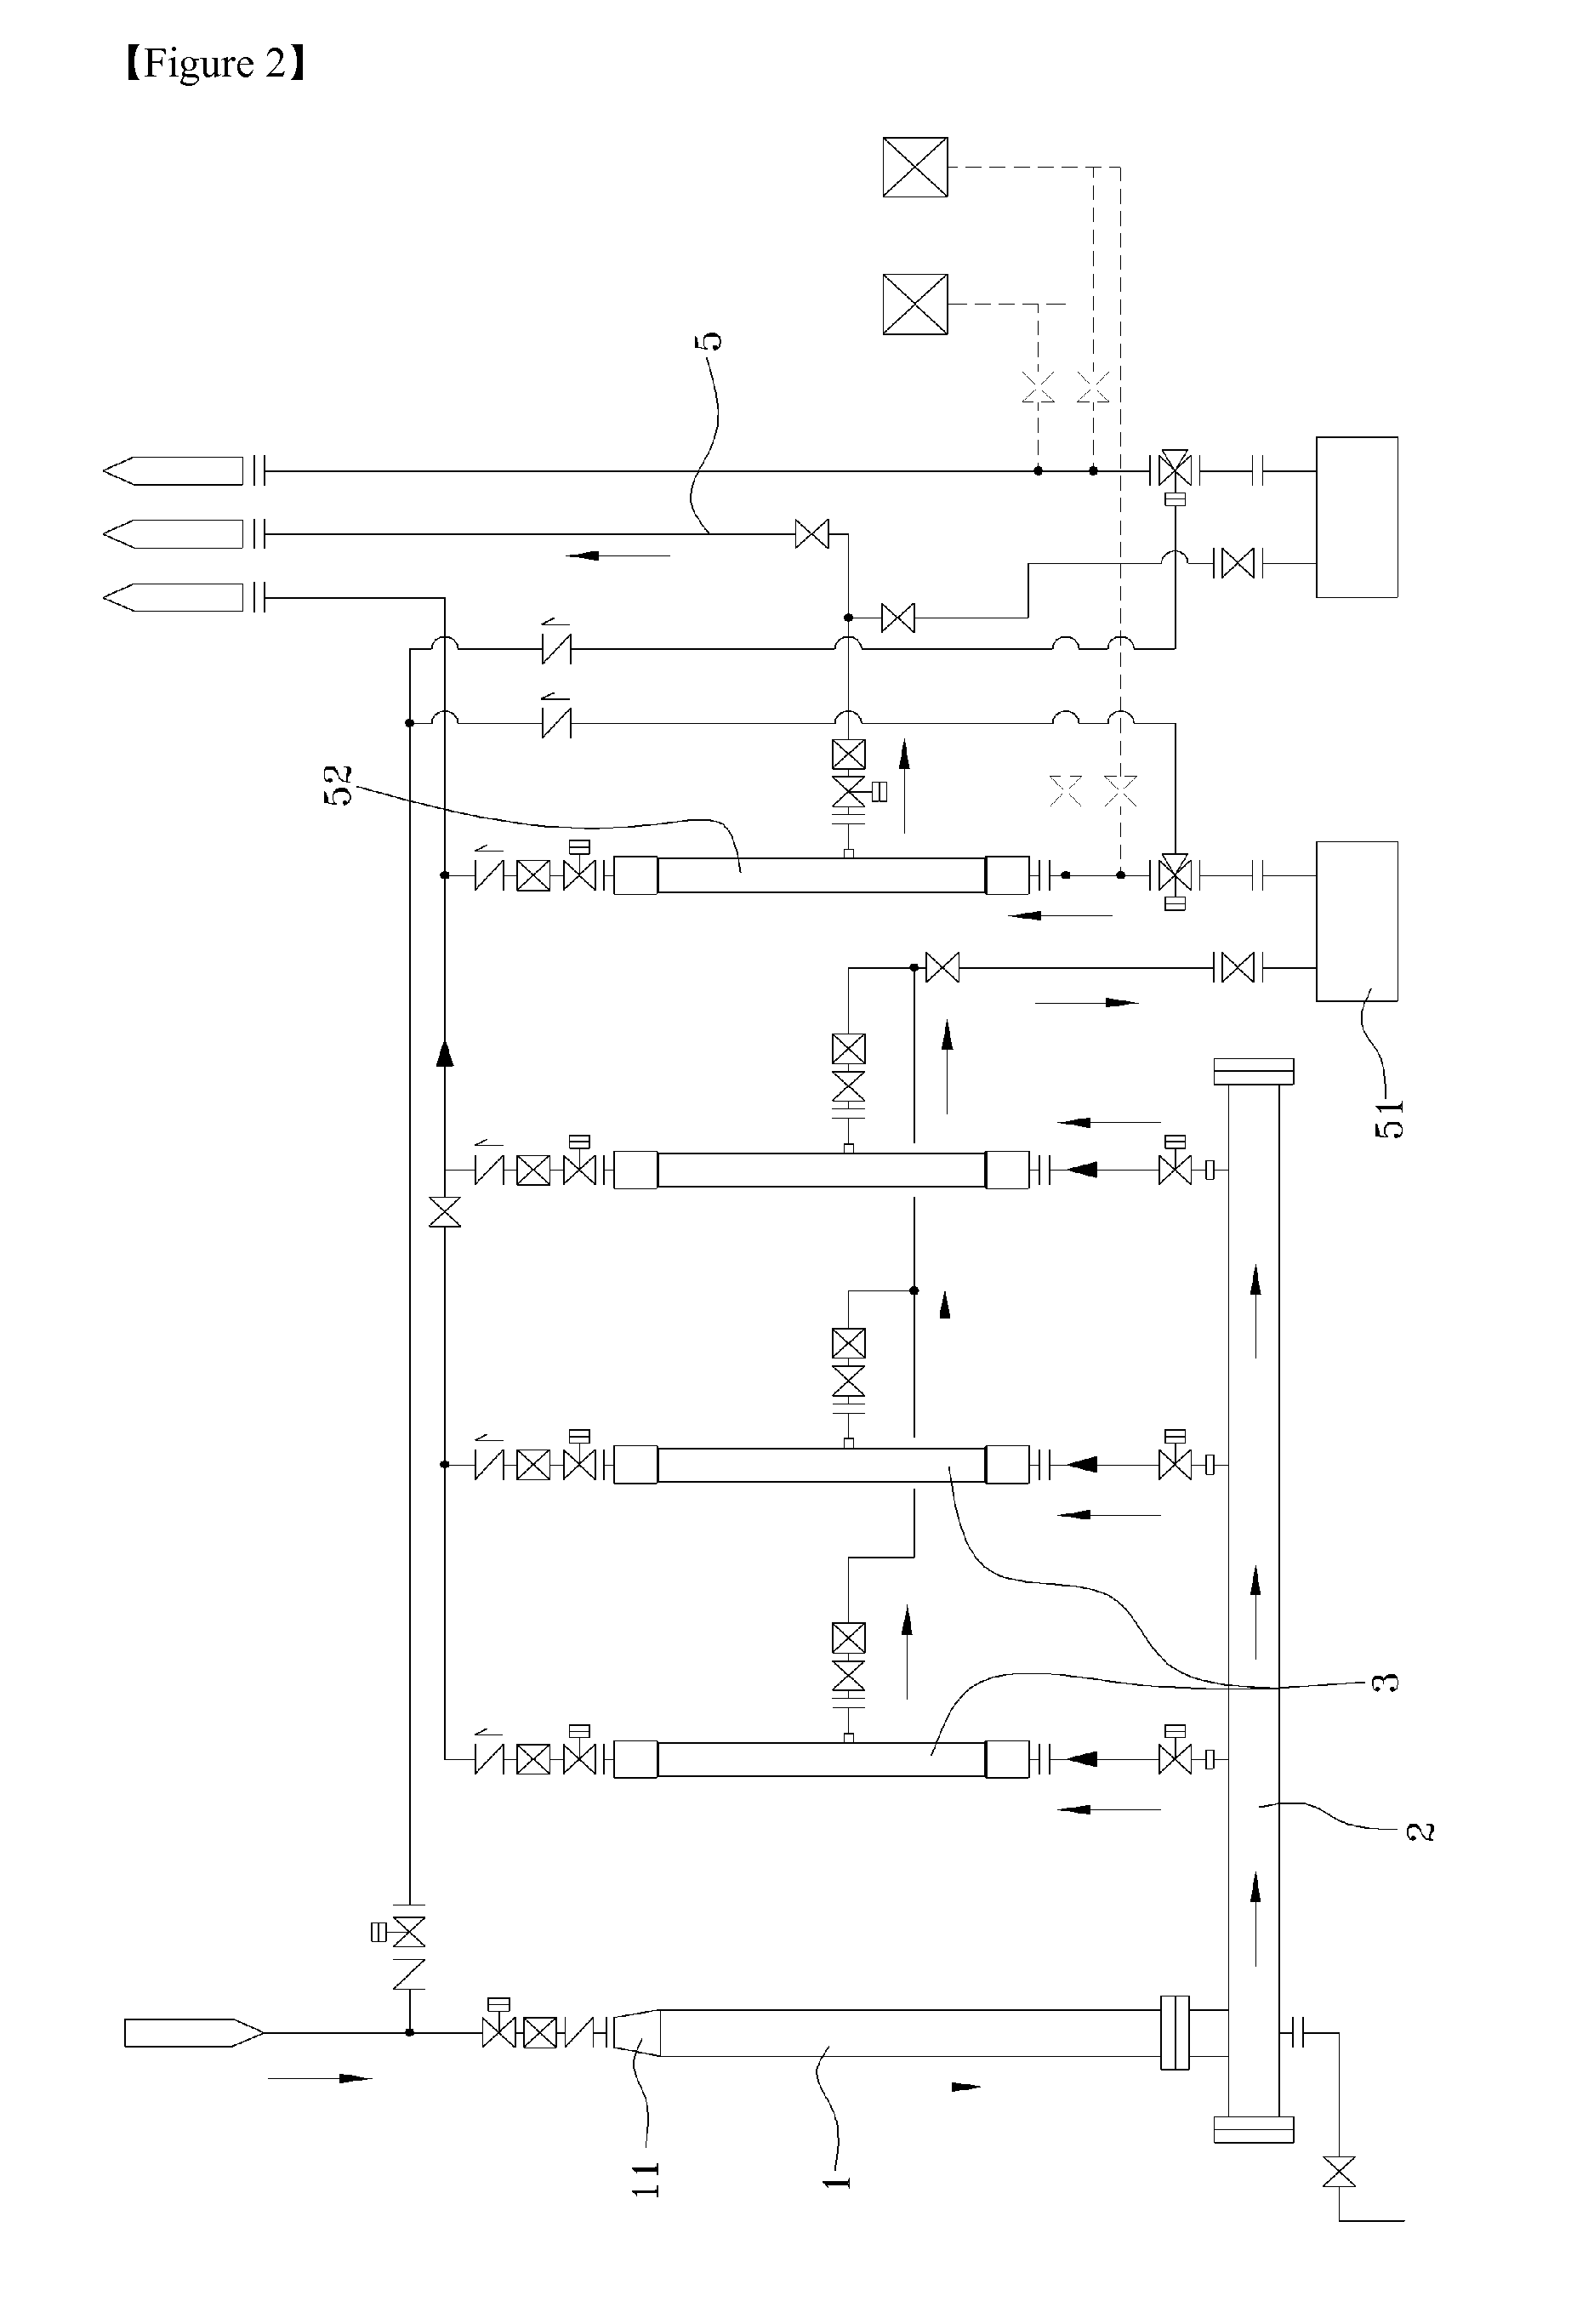 Separation and recycling system of perfluorinated compounds